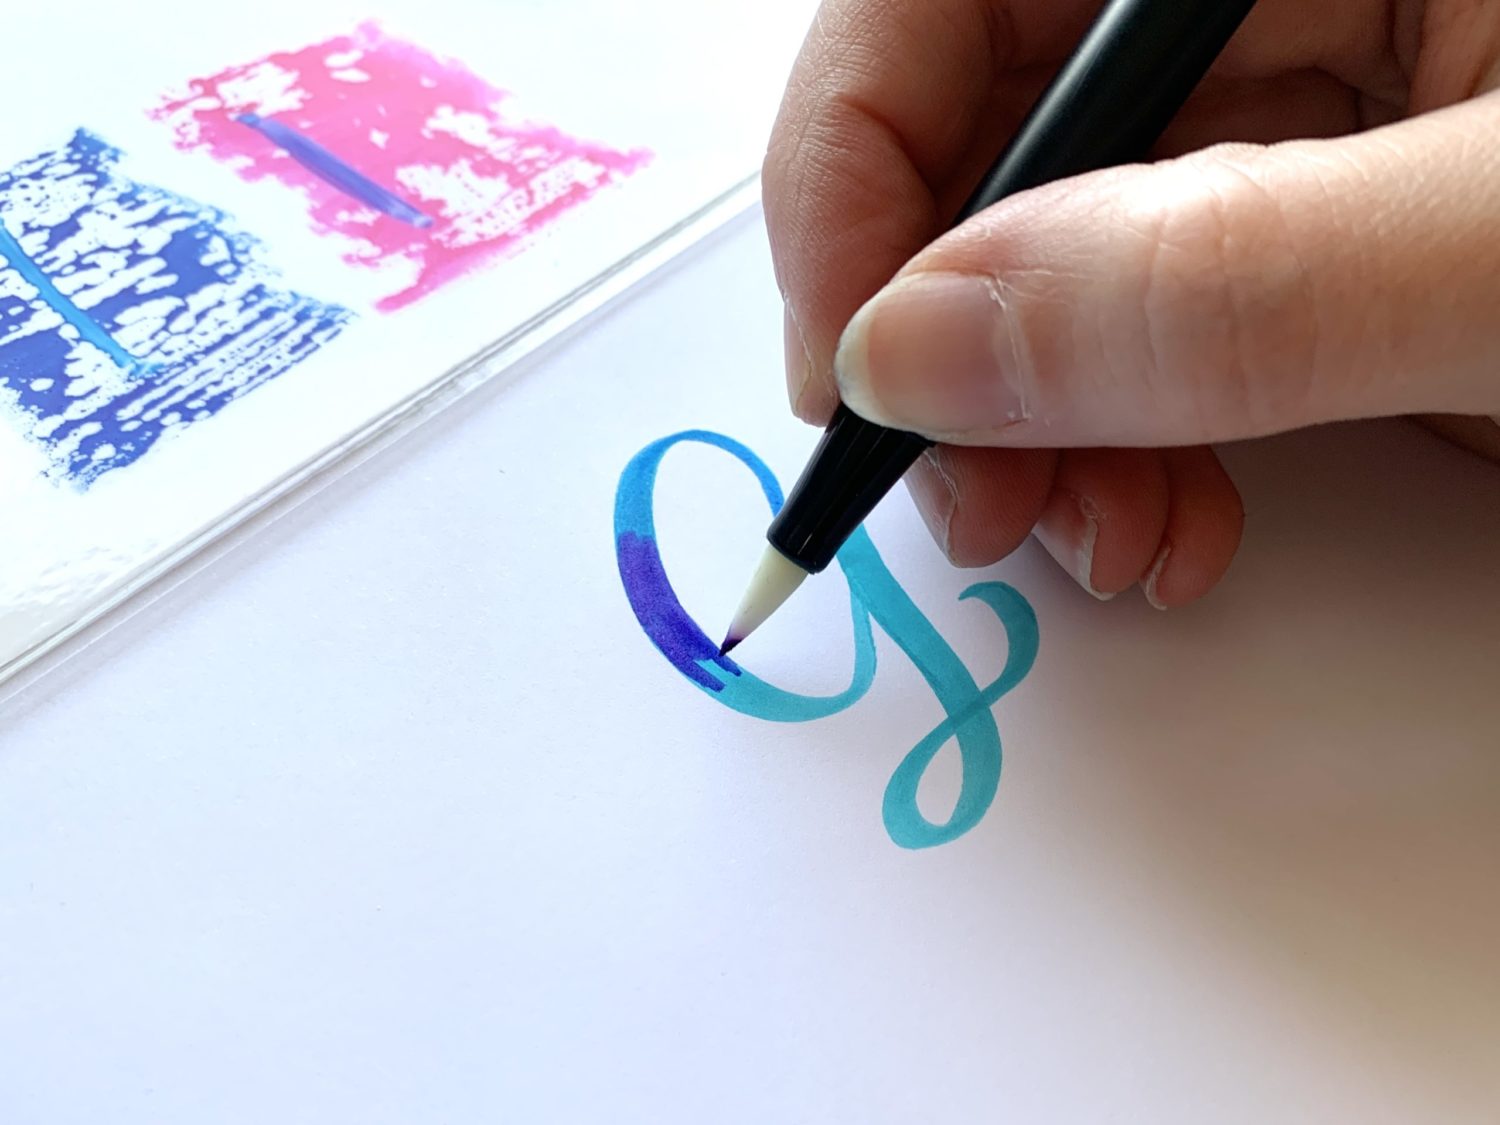 Galaxy Calligraphy Using the Colorless Blender - Ali LePere